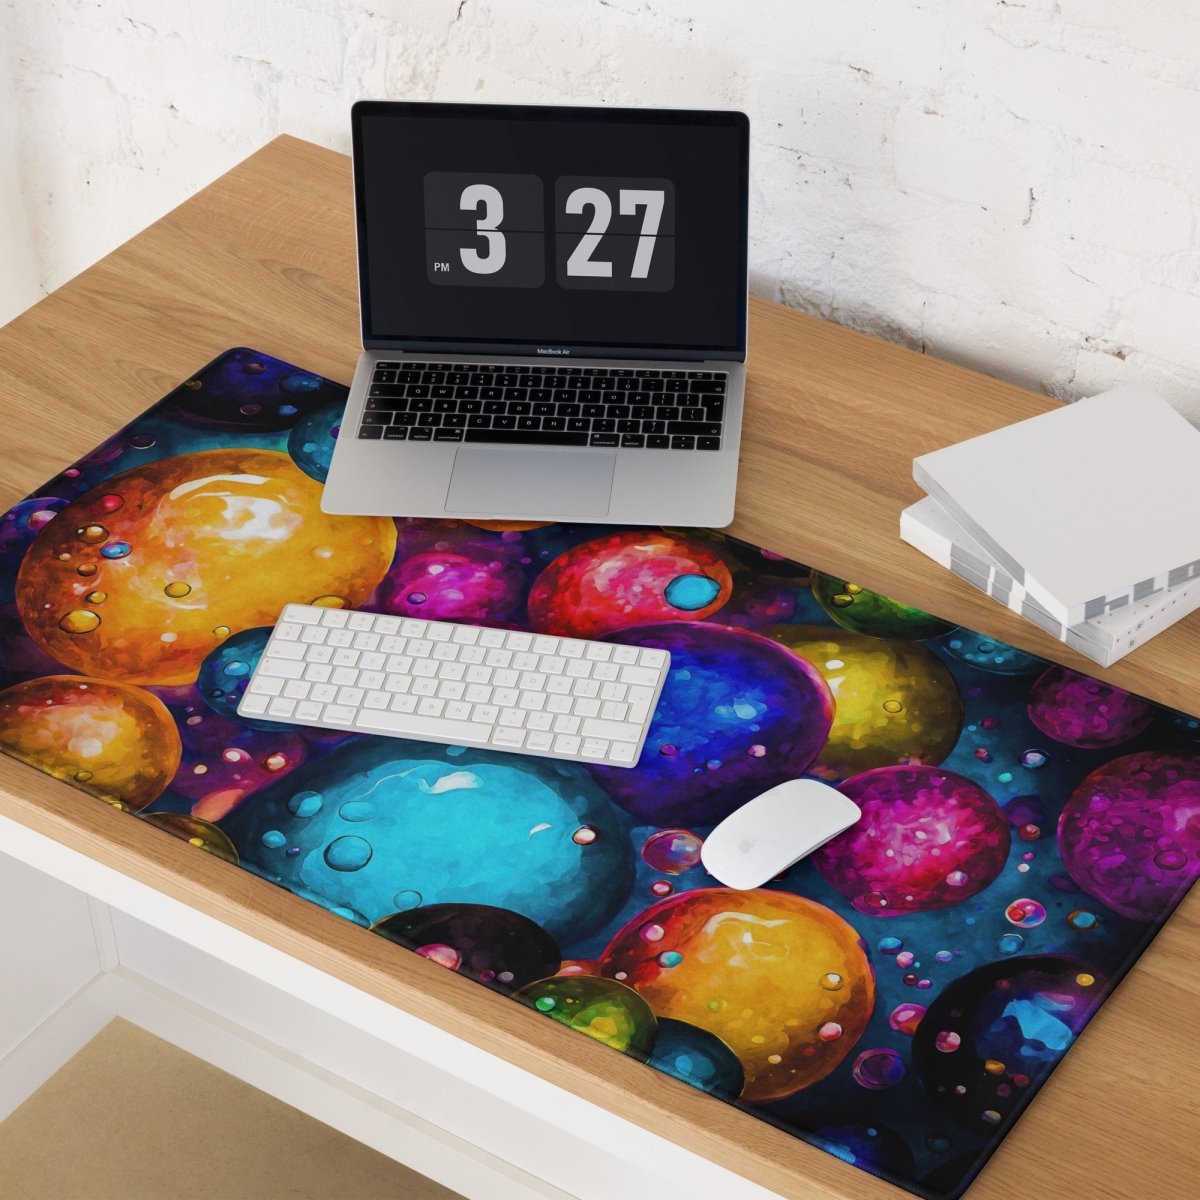 Planetary marbles - Gaming mouse pad - Ever colorful